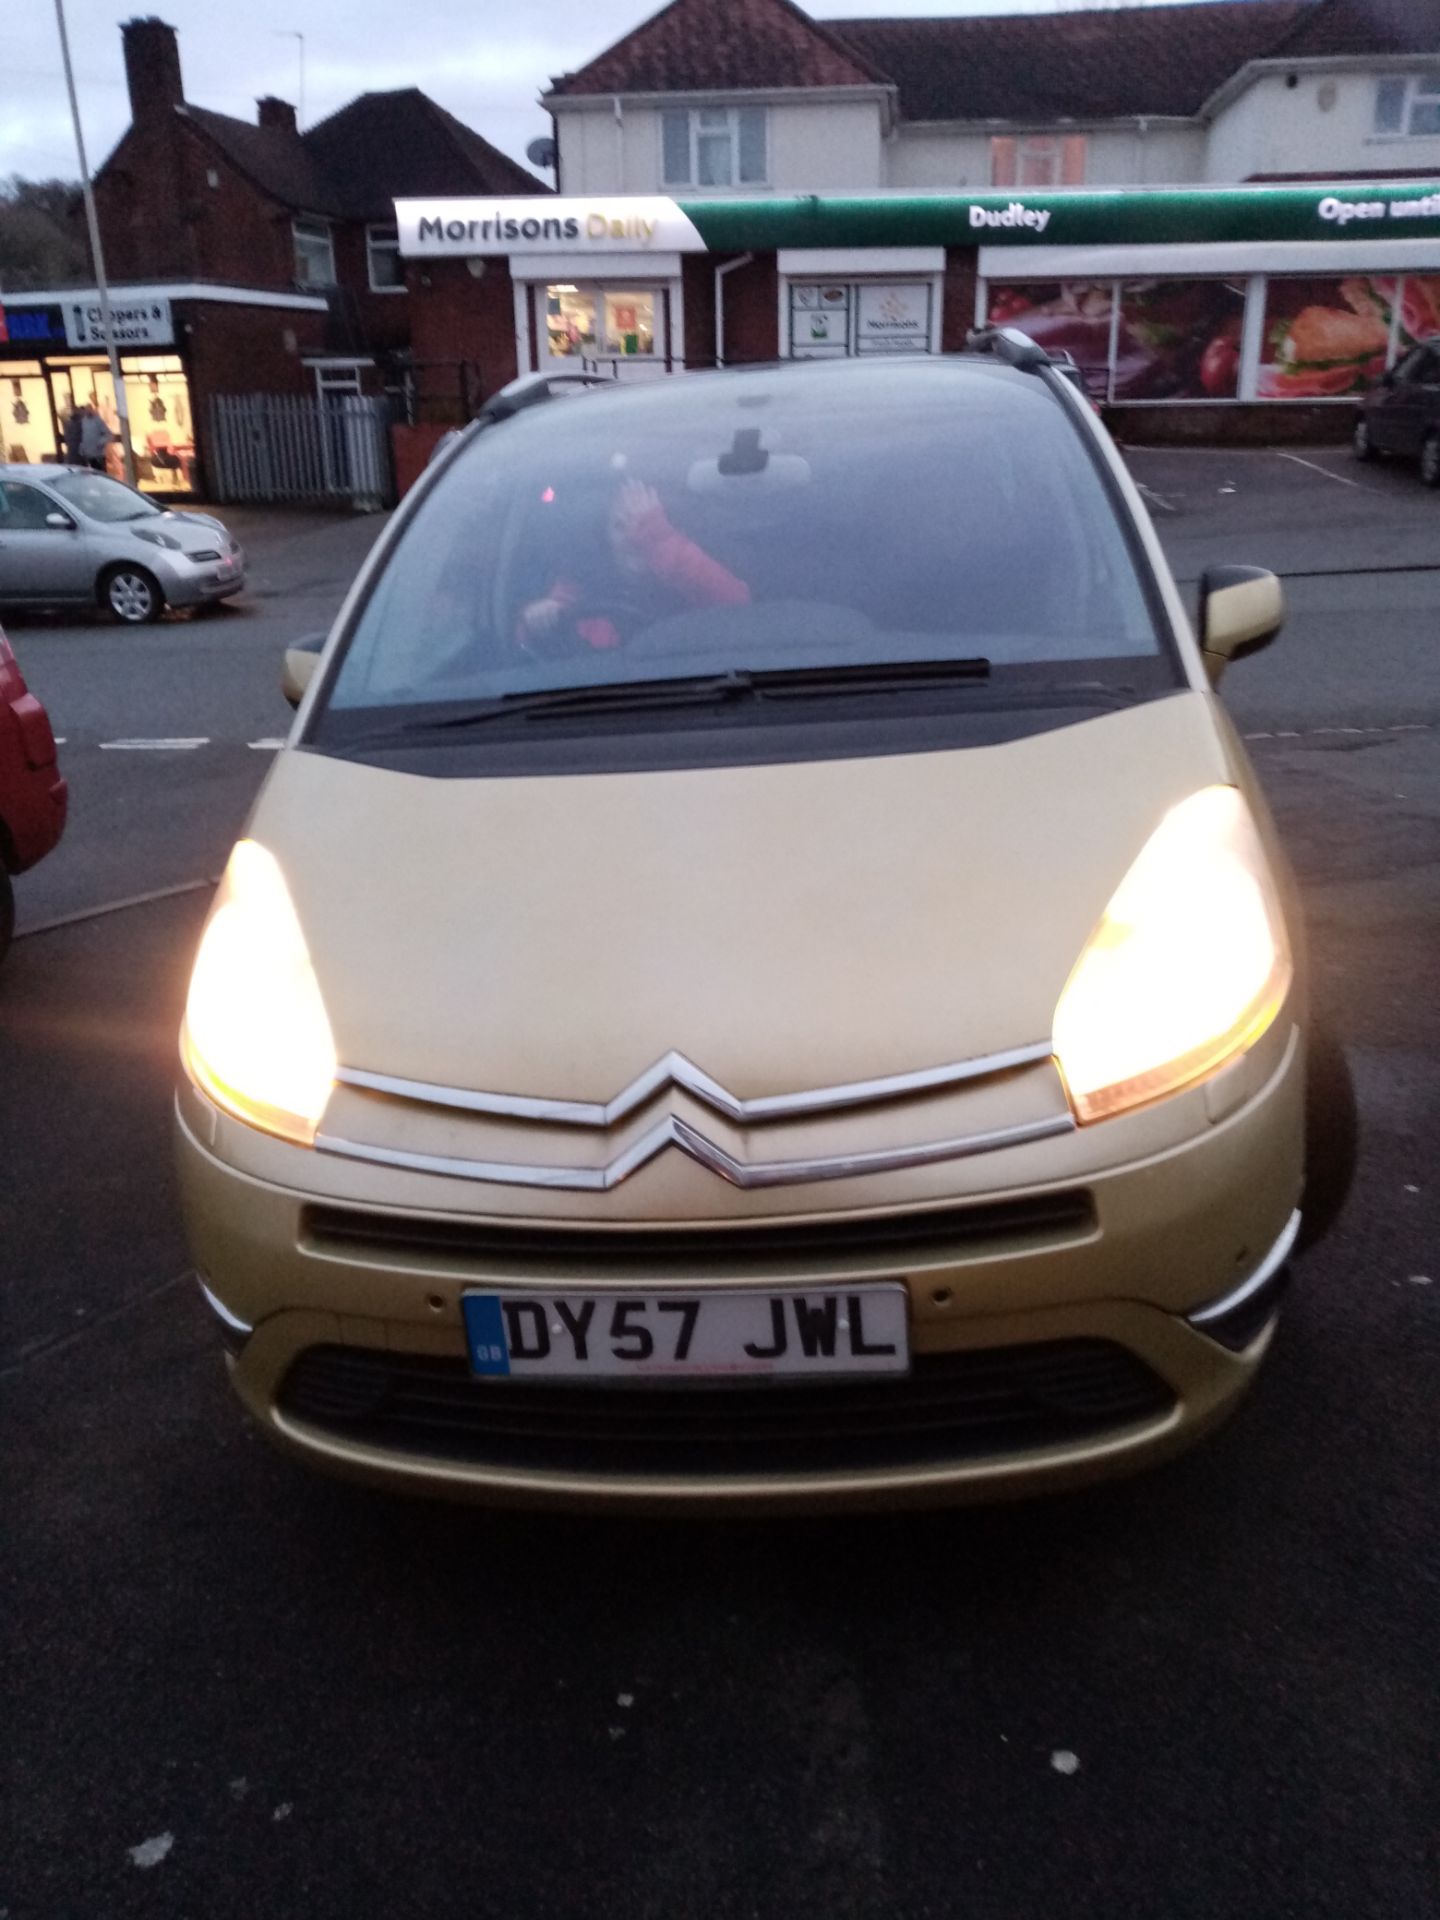 2007 CITROEN C4 GRAND PICASSO 7 SEAT EXCL HDI A - Image 2 of 15